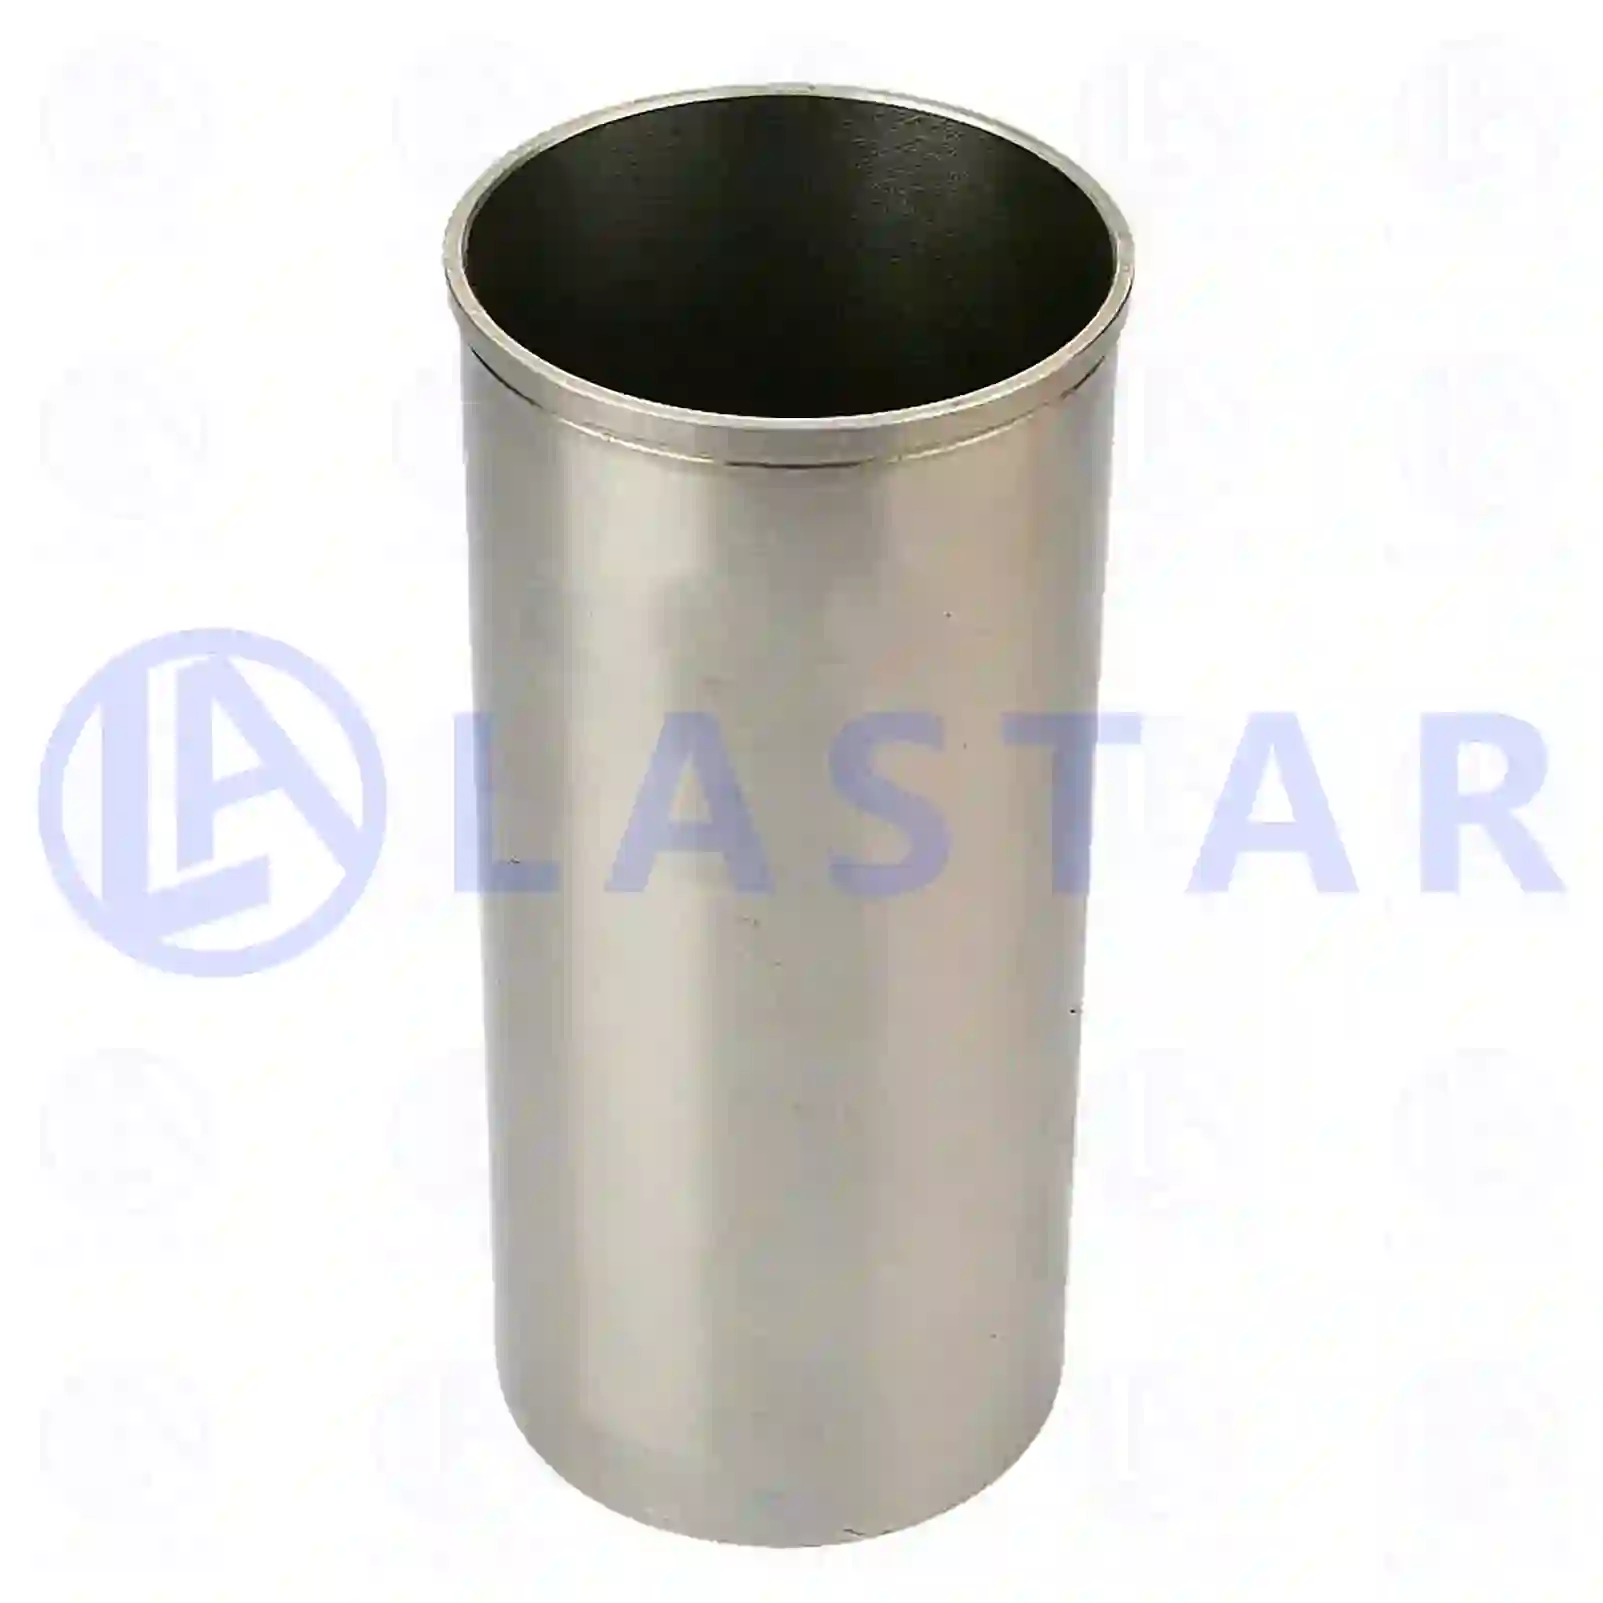 Piston & Liner Cylinder liner, without seal rings, la no: 77701981 ,  oem no:3520110310, 3520111610, 3620110110, 3620110210, 3620110310, 3620110510, 3620110610, 3660110410, 3660110510, 3660110610 Lastar Spare Part | Truck Spare Parts, Auotomotive Spare Parts